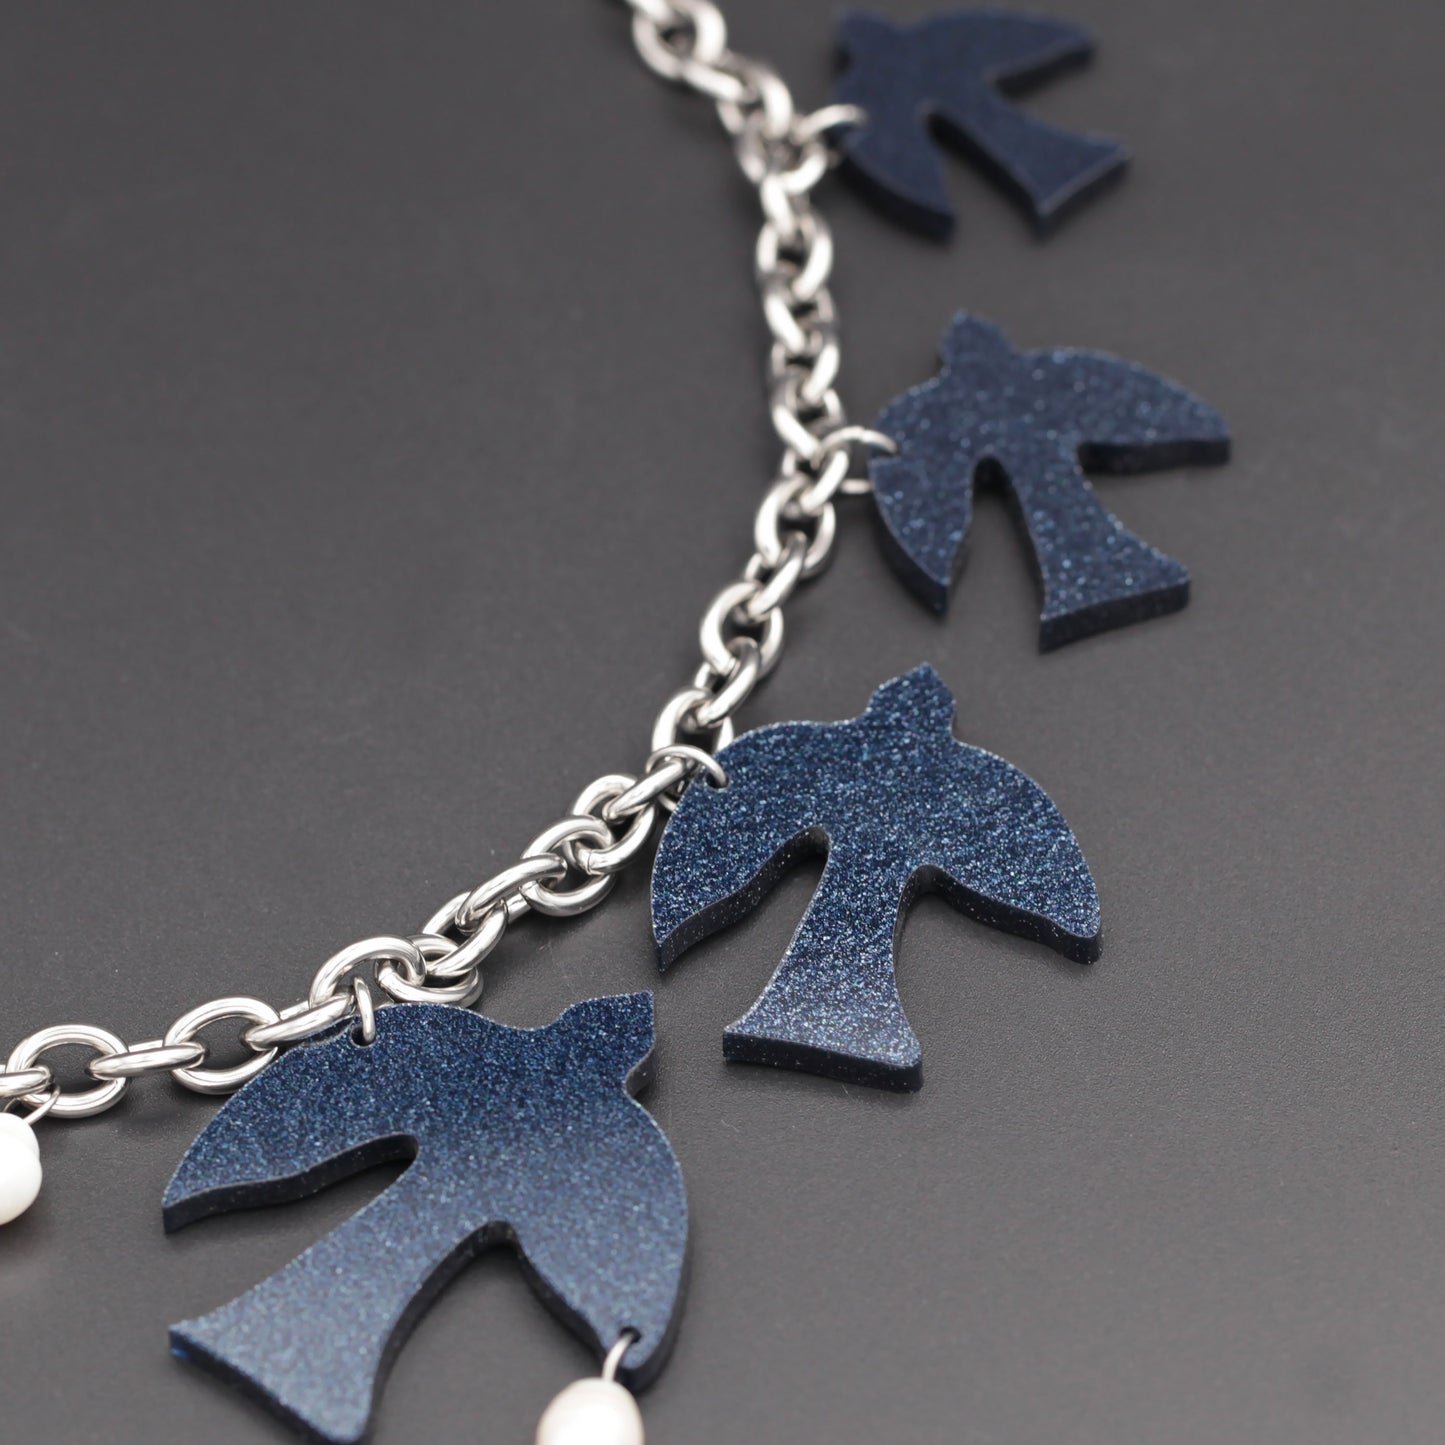 A close-up of a dark blue glittery acrylic, laser-cut birds, and white freshwater pearls hanging on a thick steel chain on a black background.